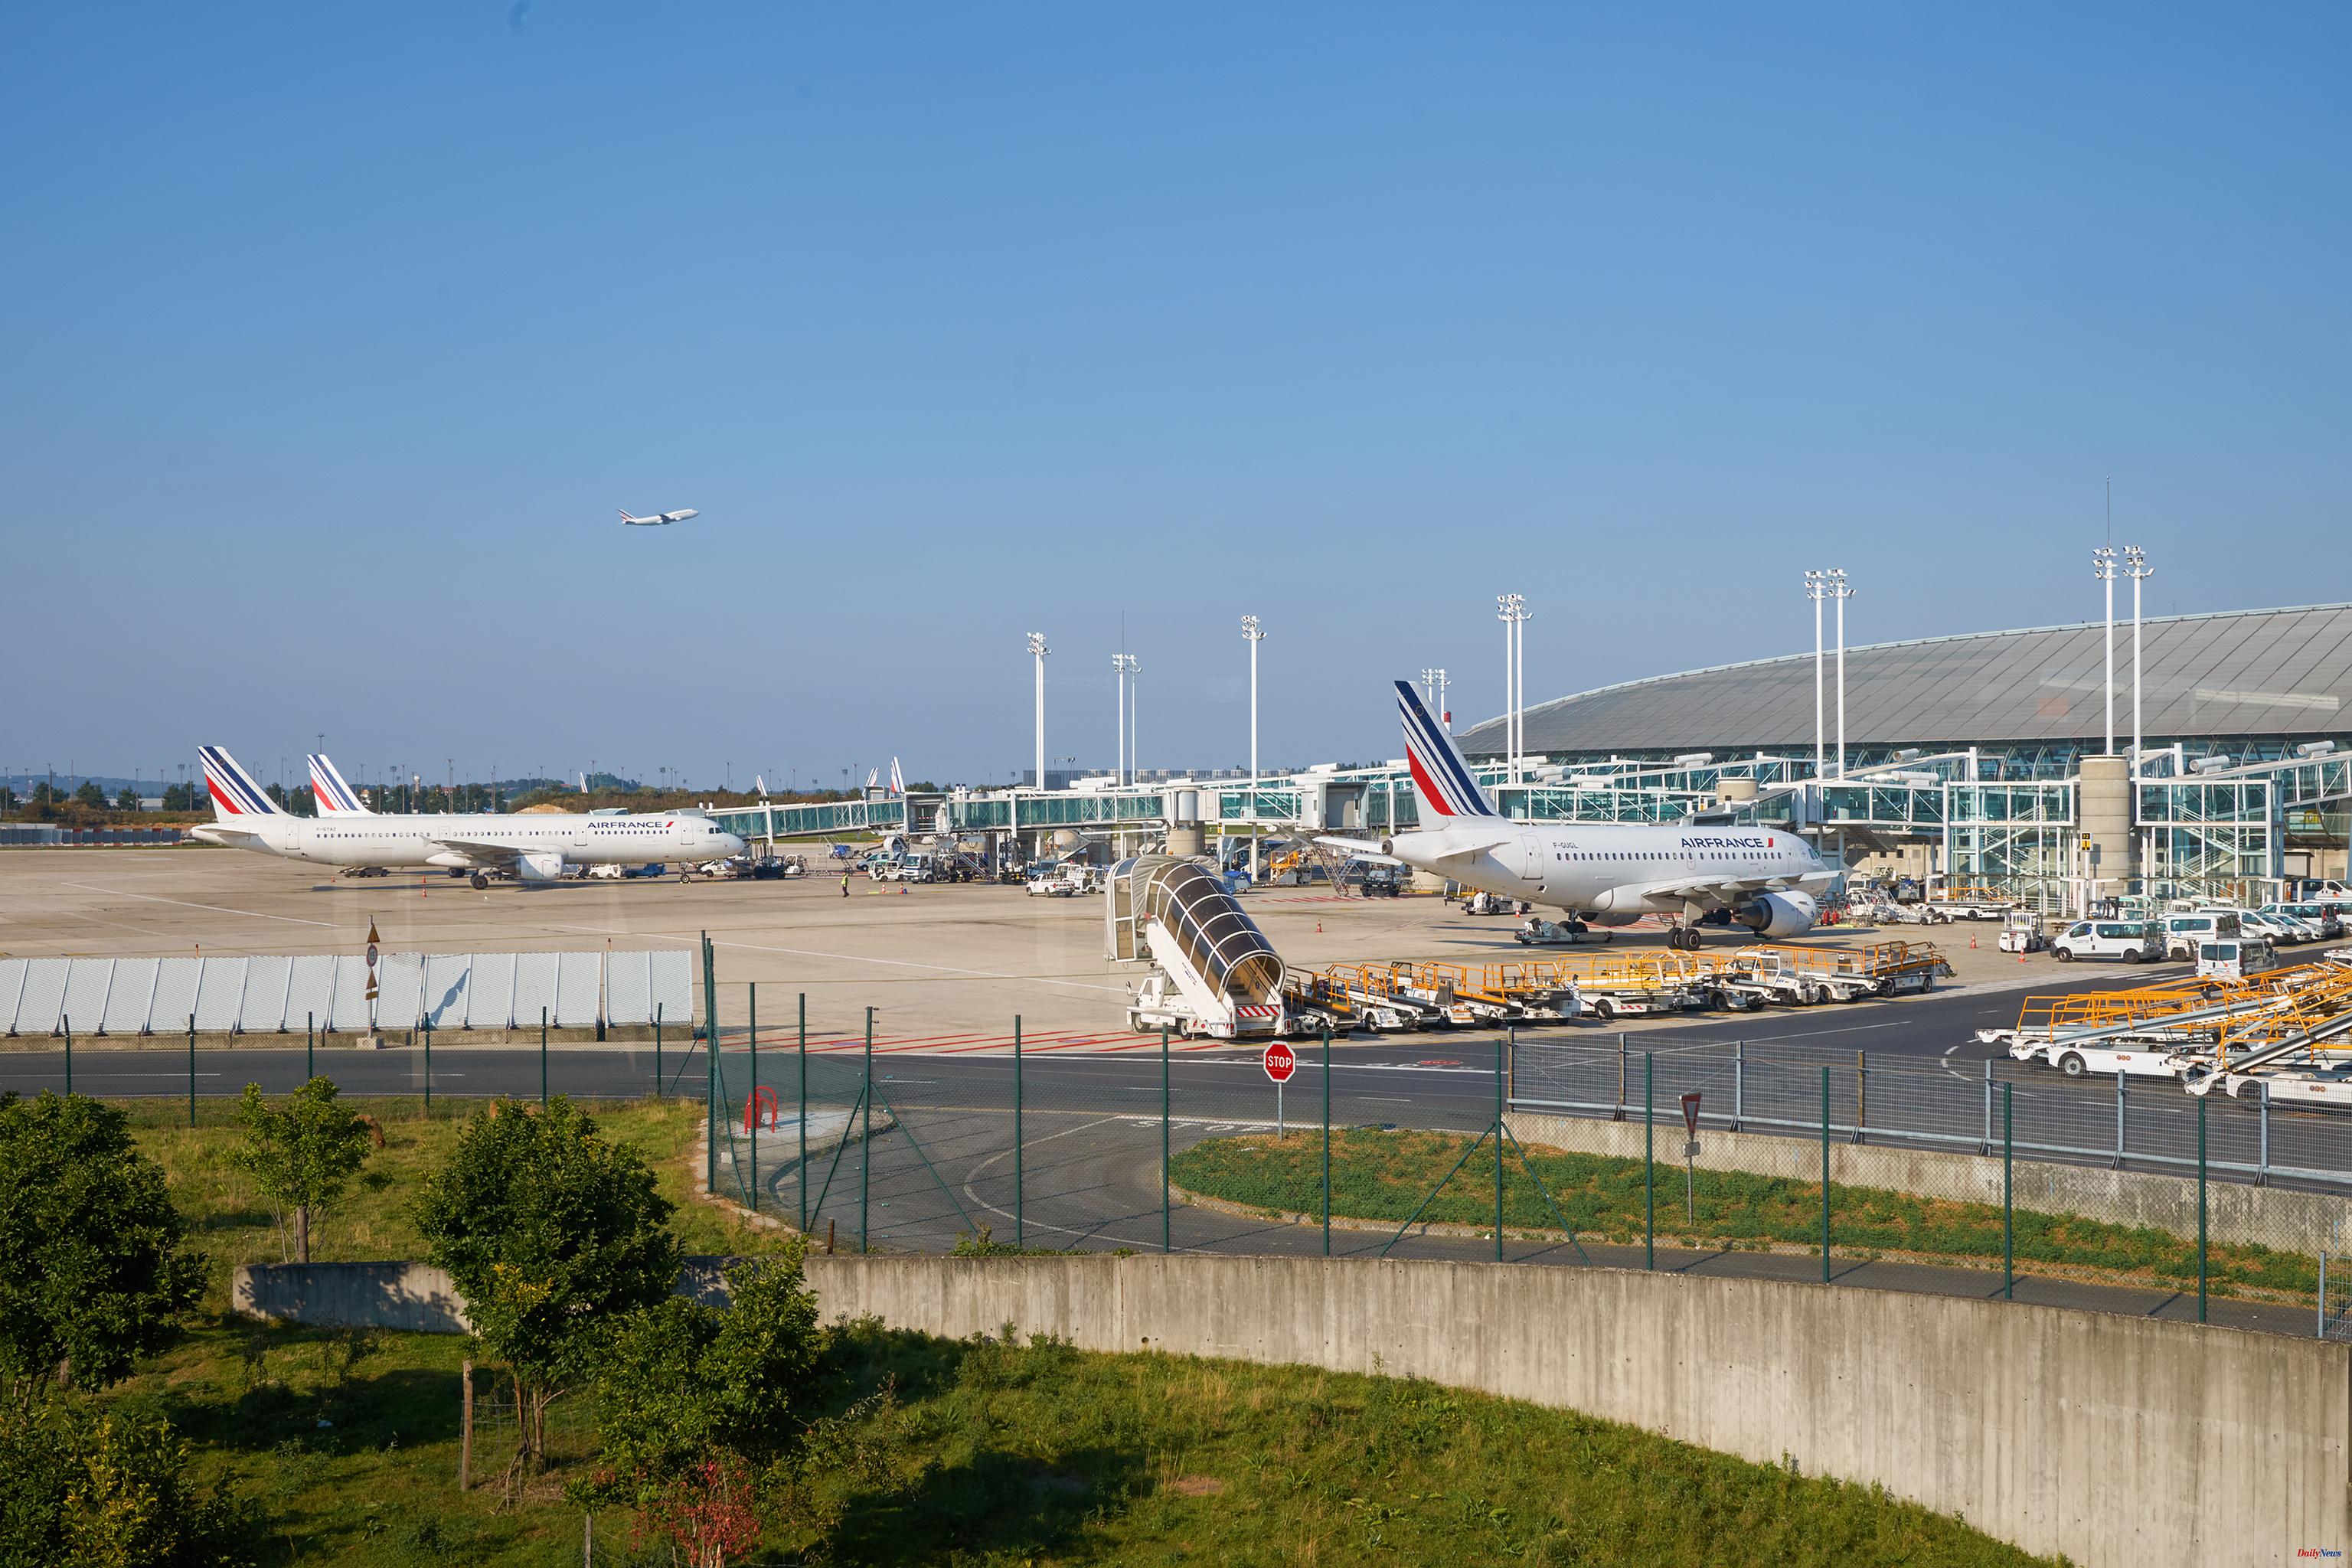 Economy France prohibits from today short flights within the country with an alternative by train